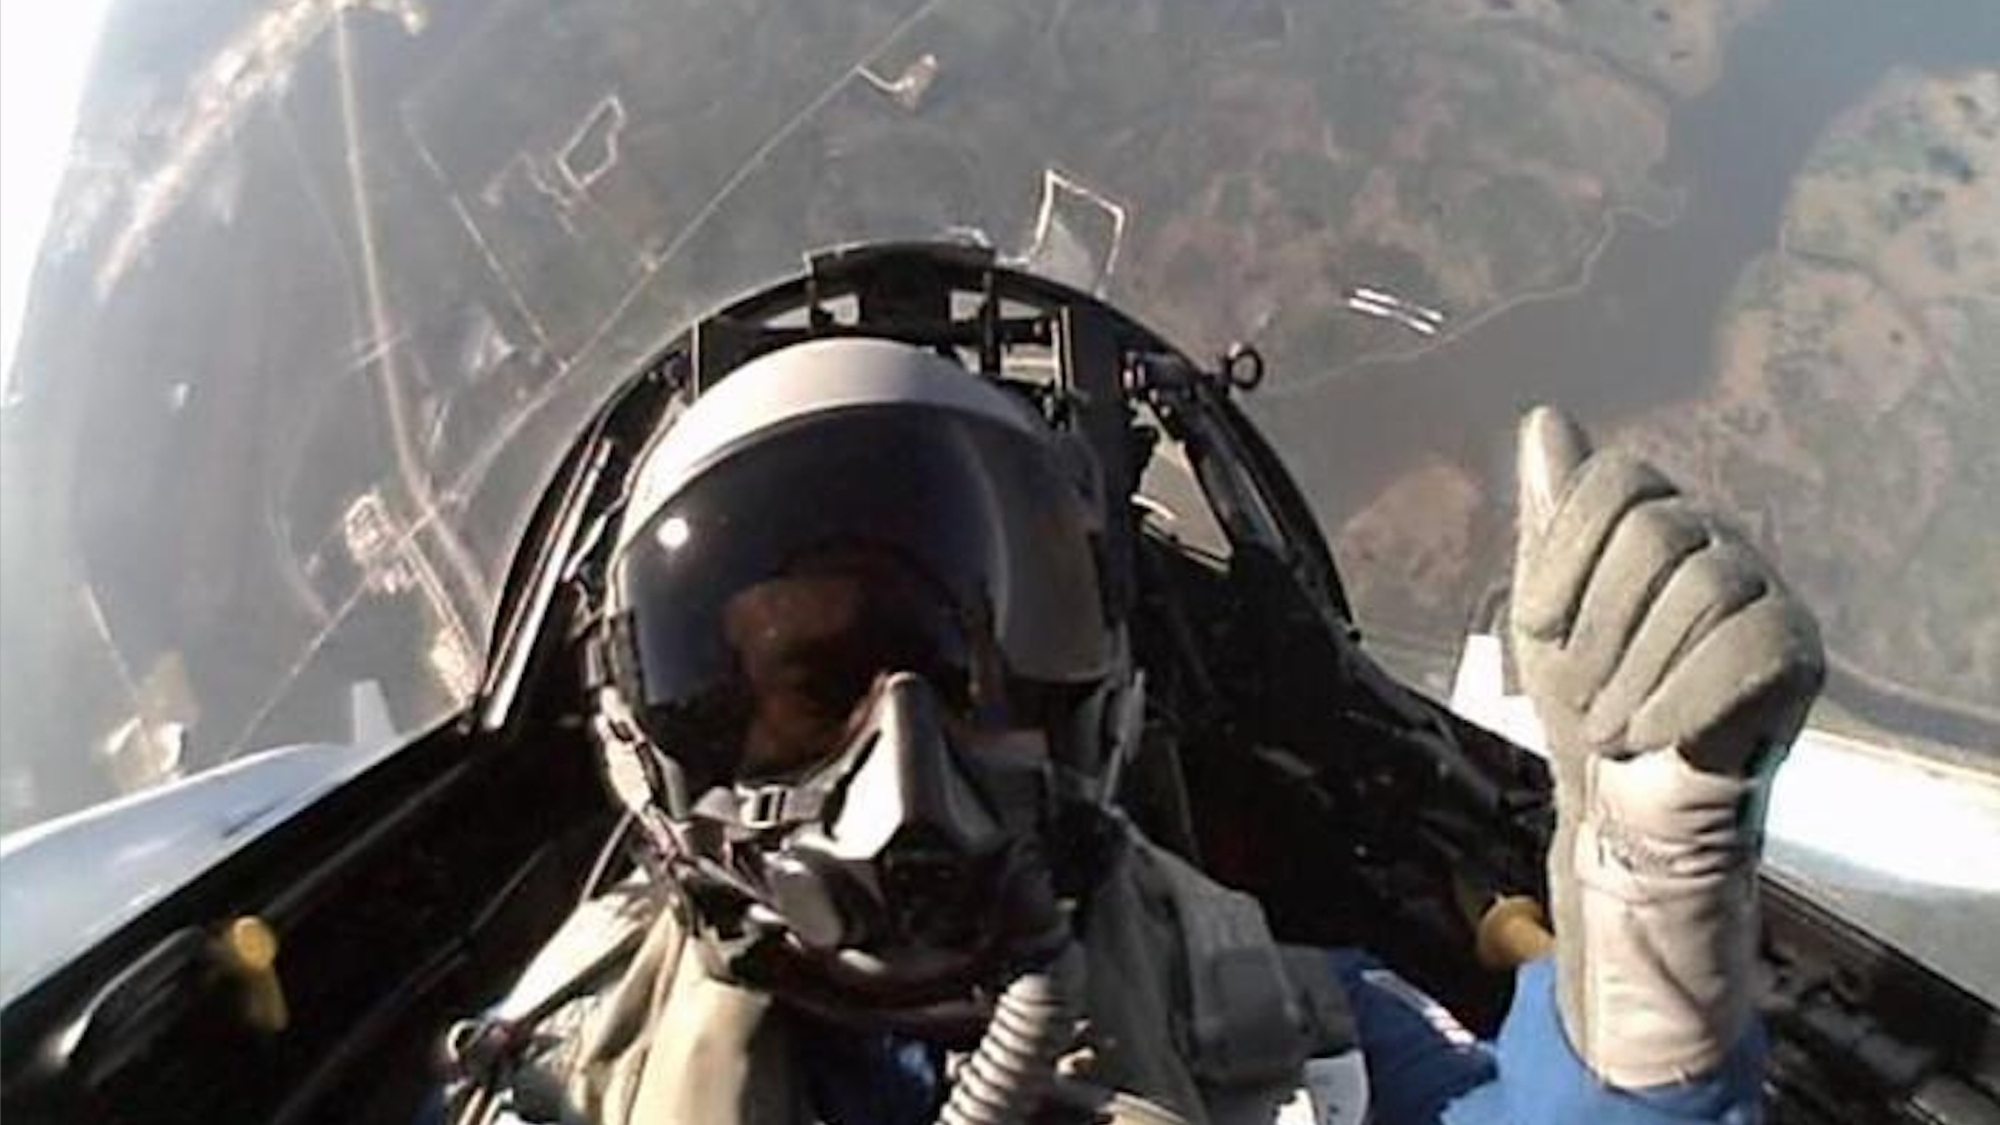 a person in a helmet gives a thumbs-up from inside a jet cockpit, with the ground far away in the background.